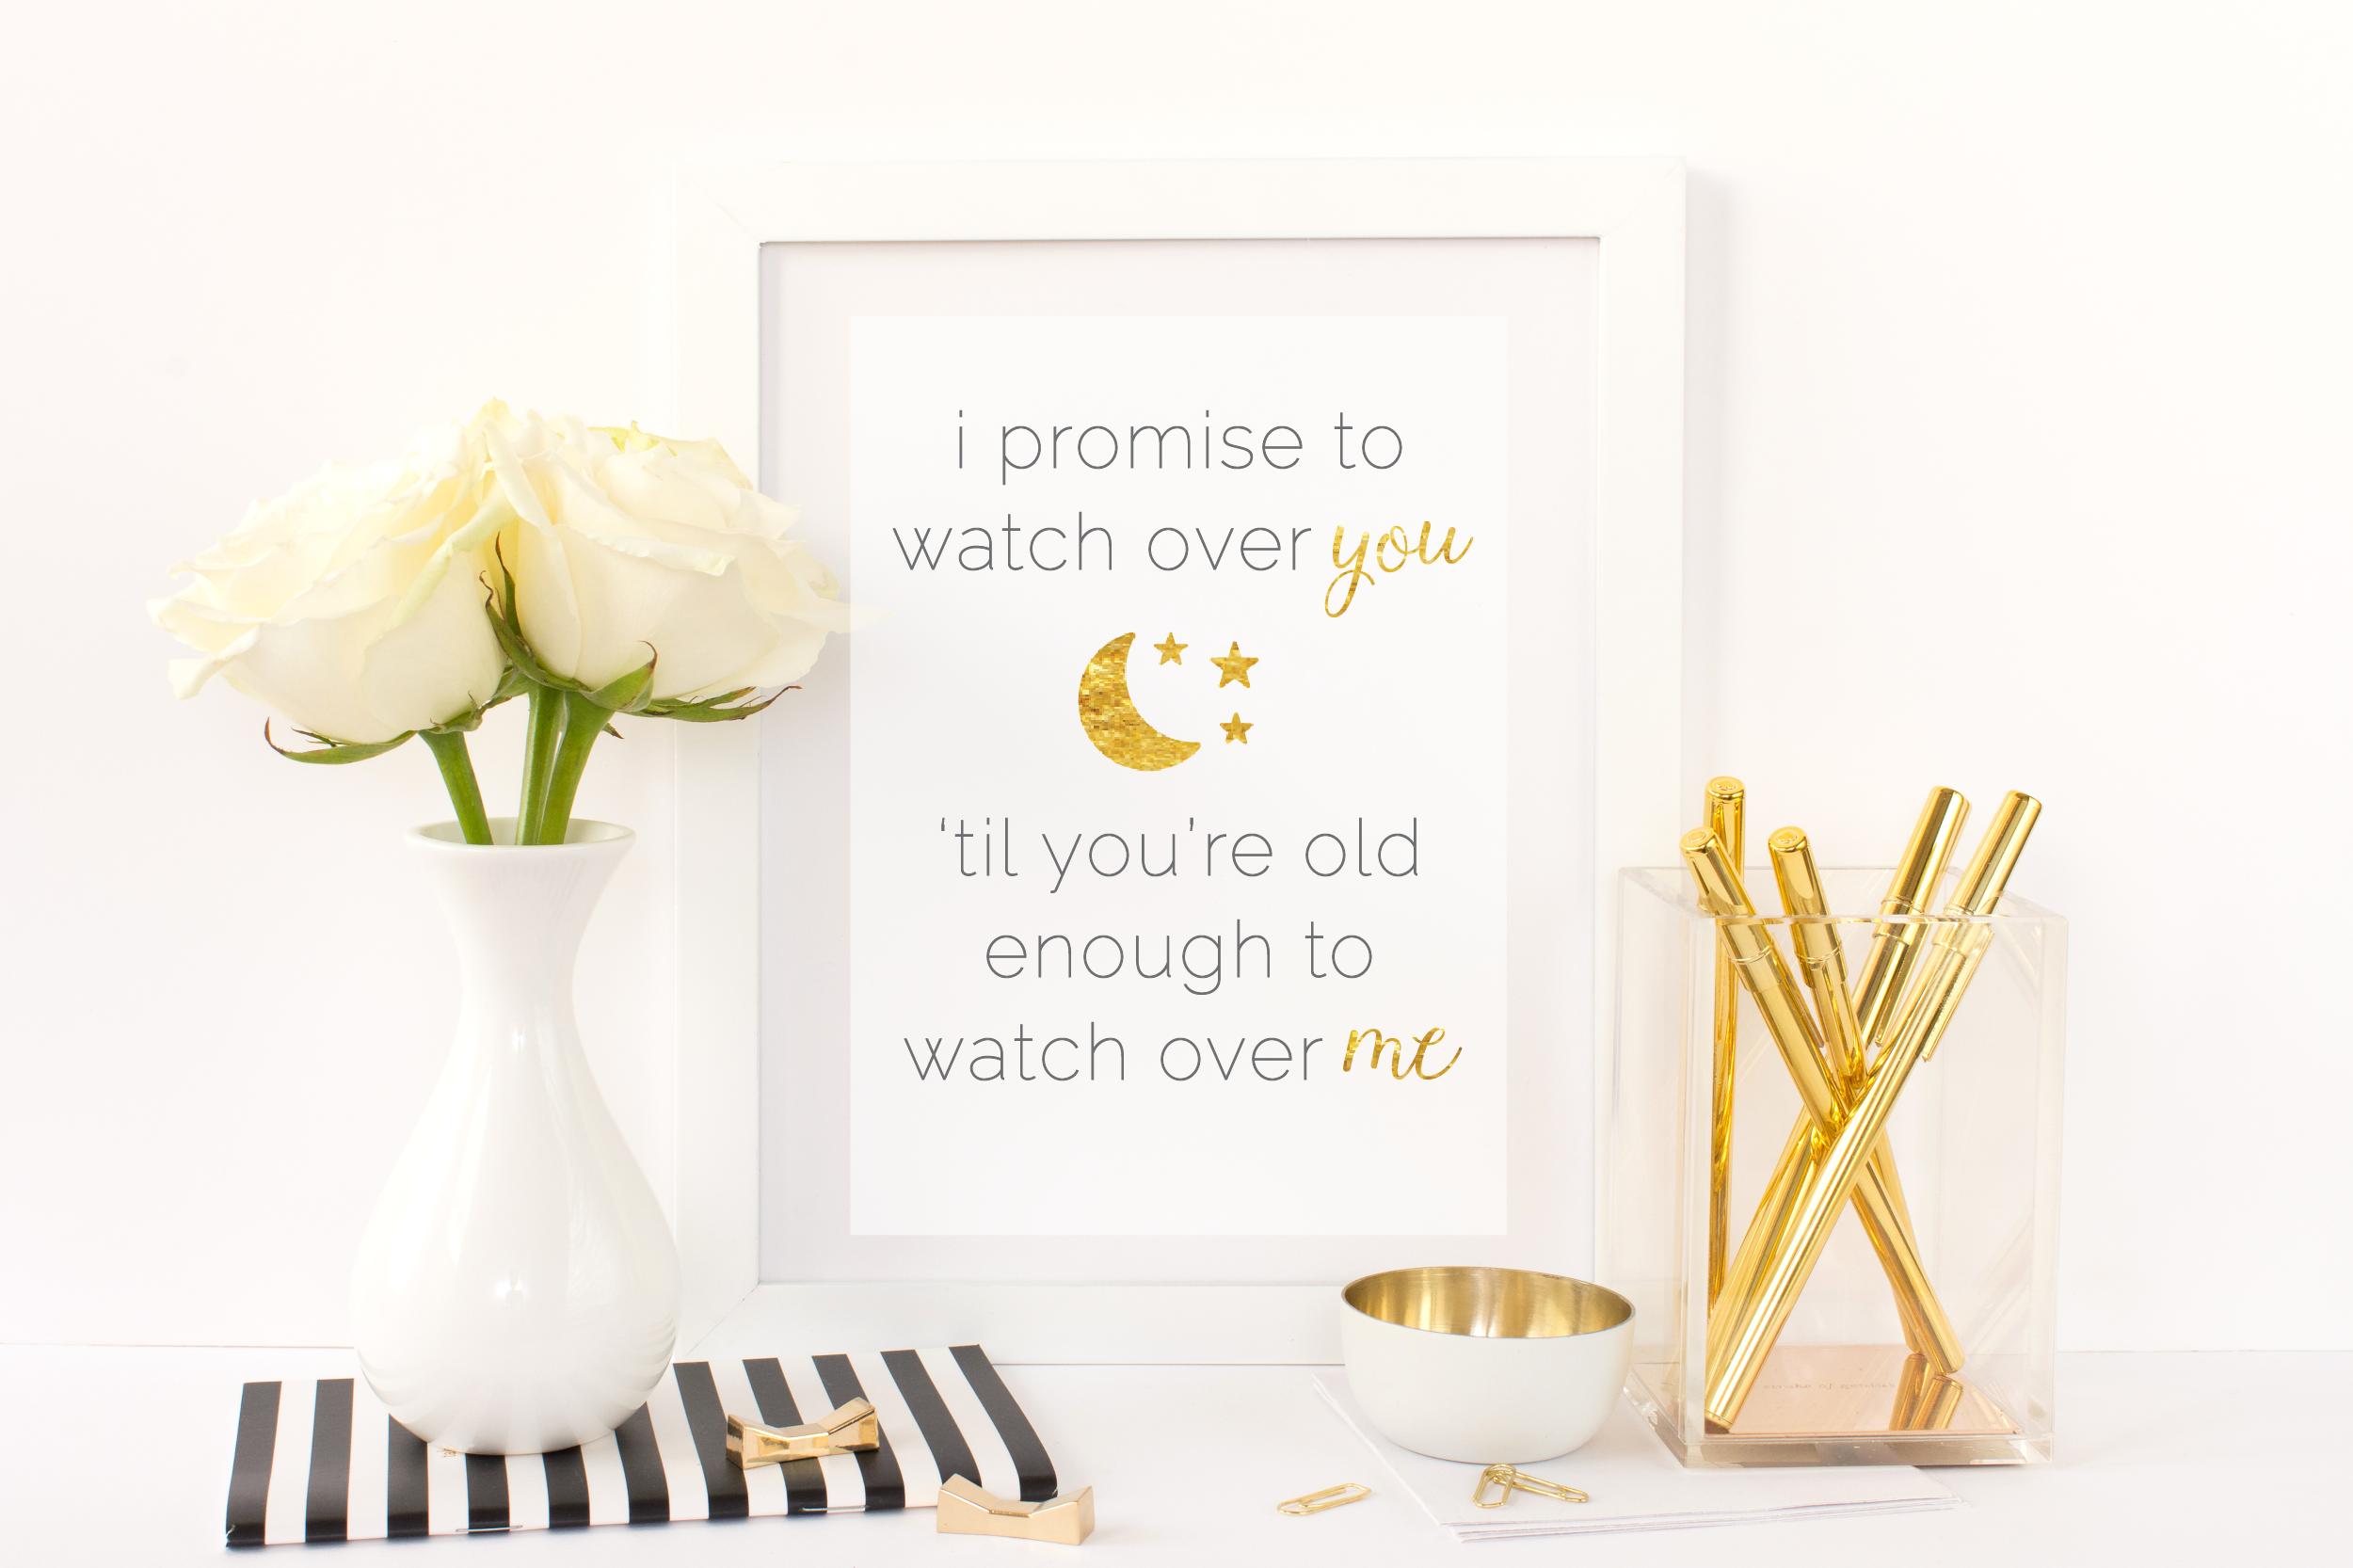 Free Printable I Promise To Watch Over You 'Til You're Old Enough To Watch Over Me from @pinkimonogirl for a gallery wall